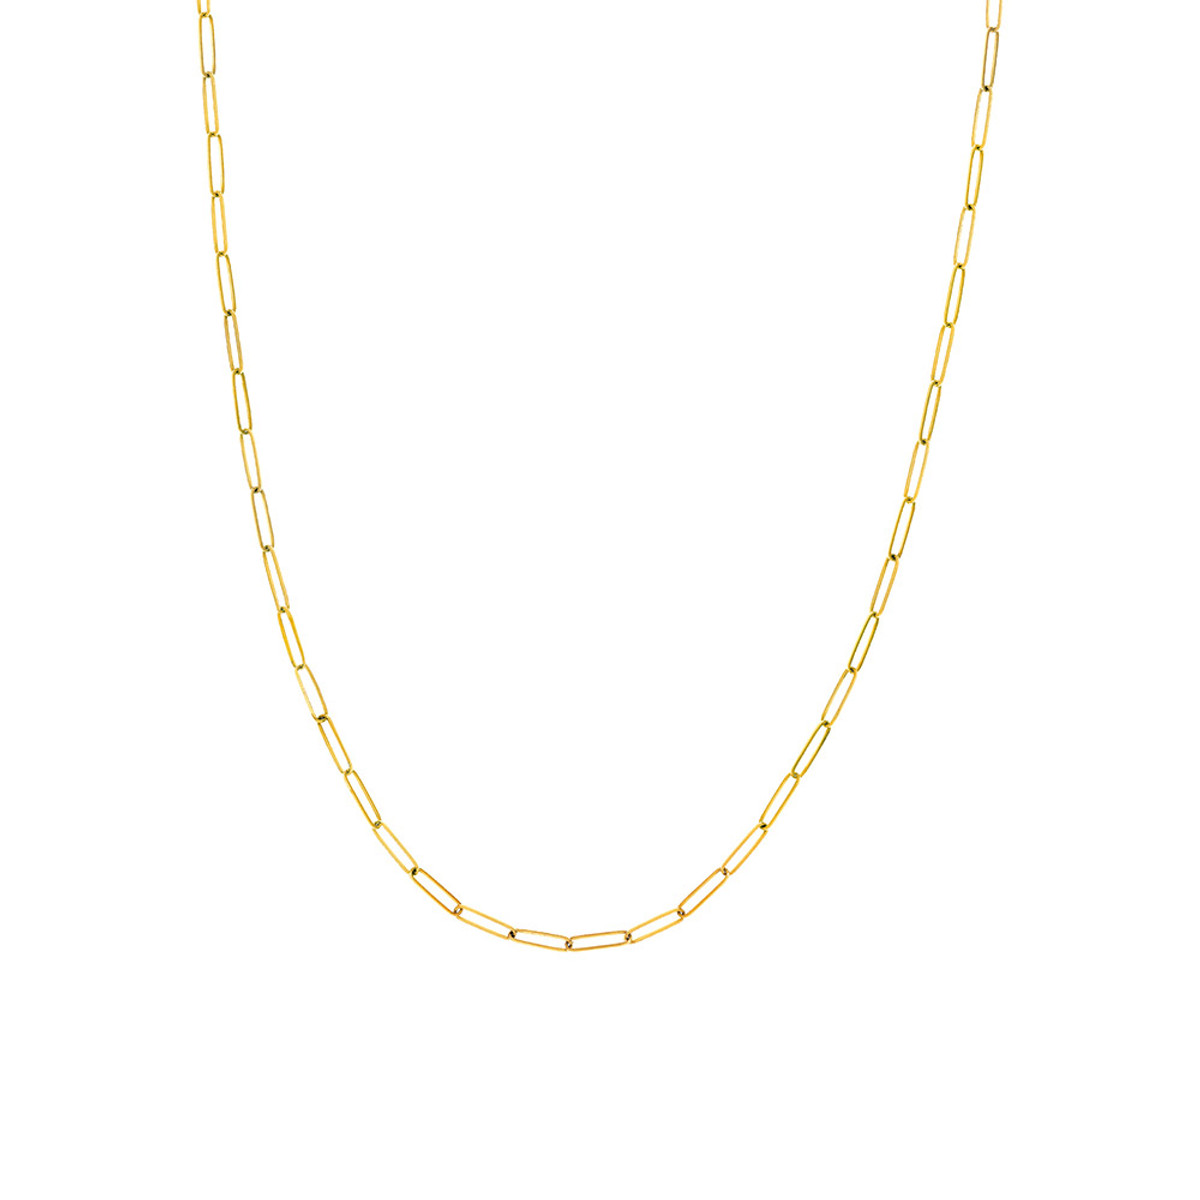 Hyde Park Collection Elong Link Chain Necklace-21912 Product Image